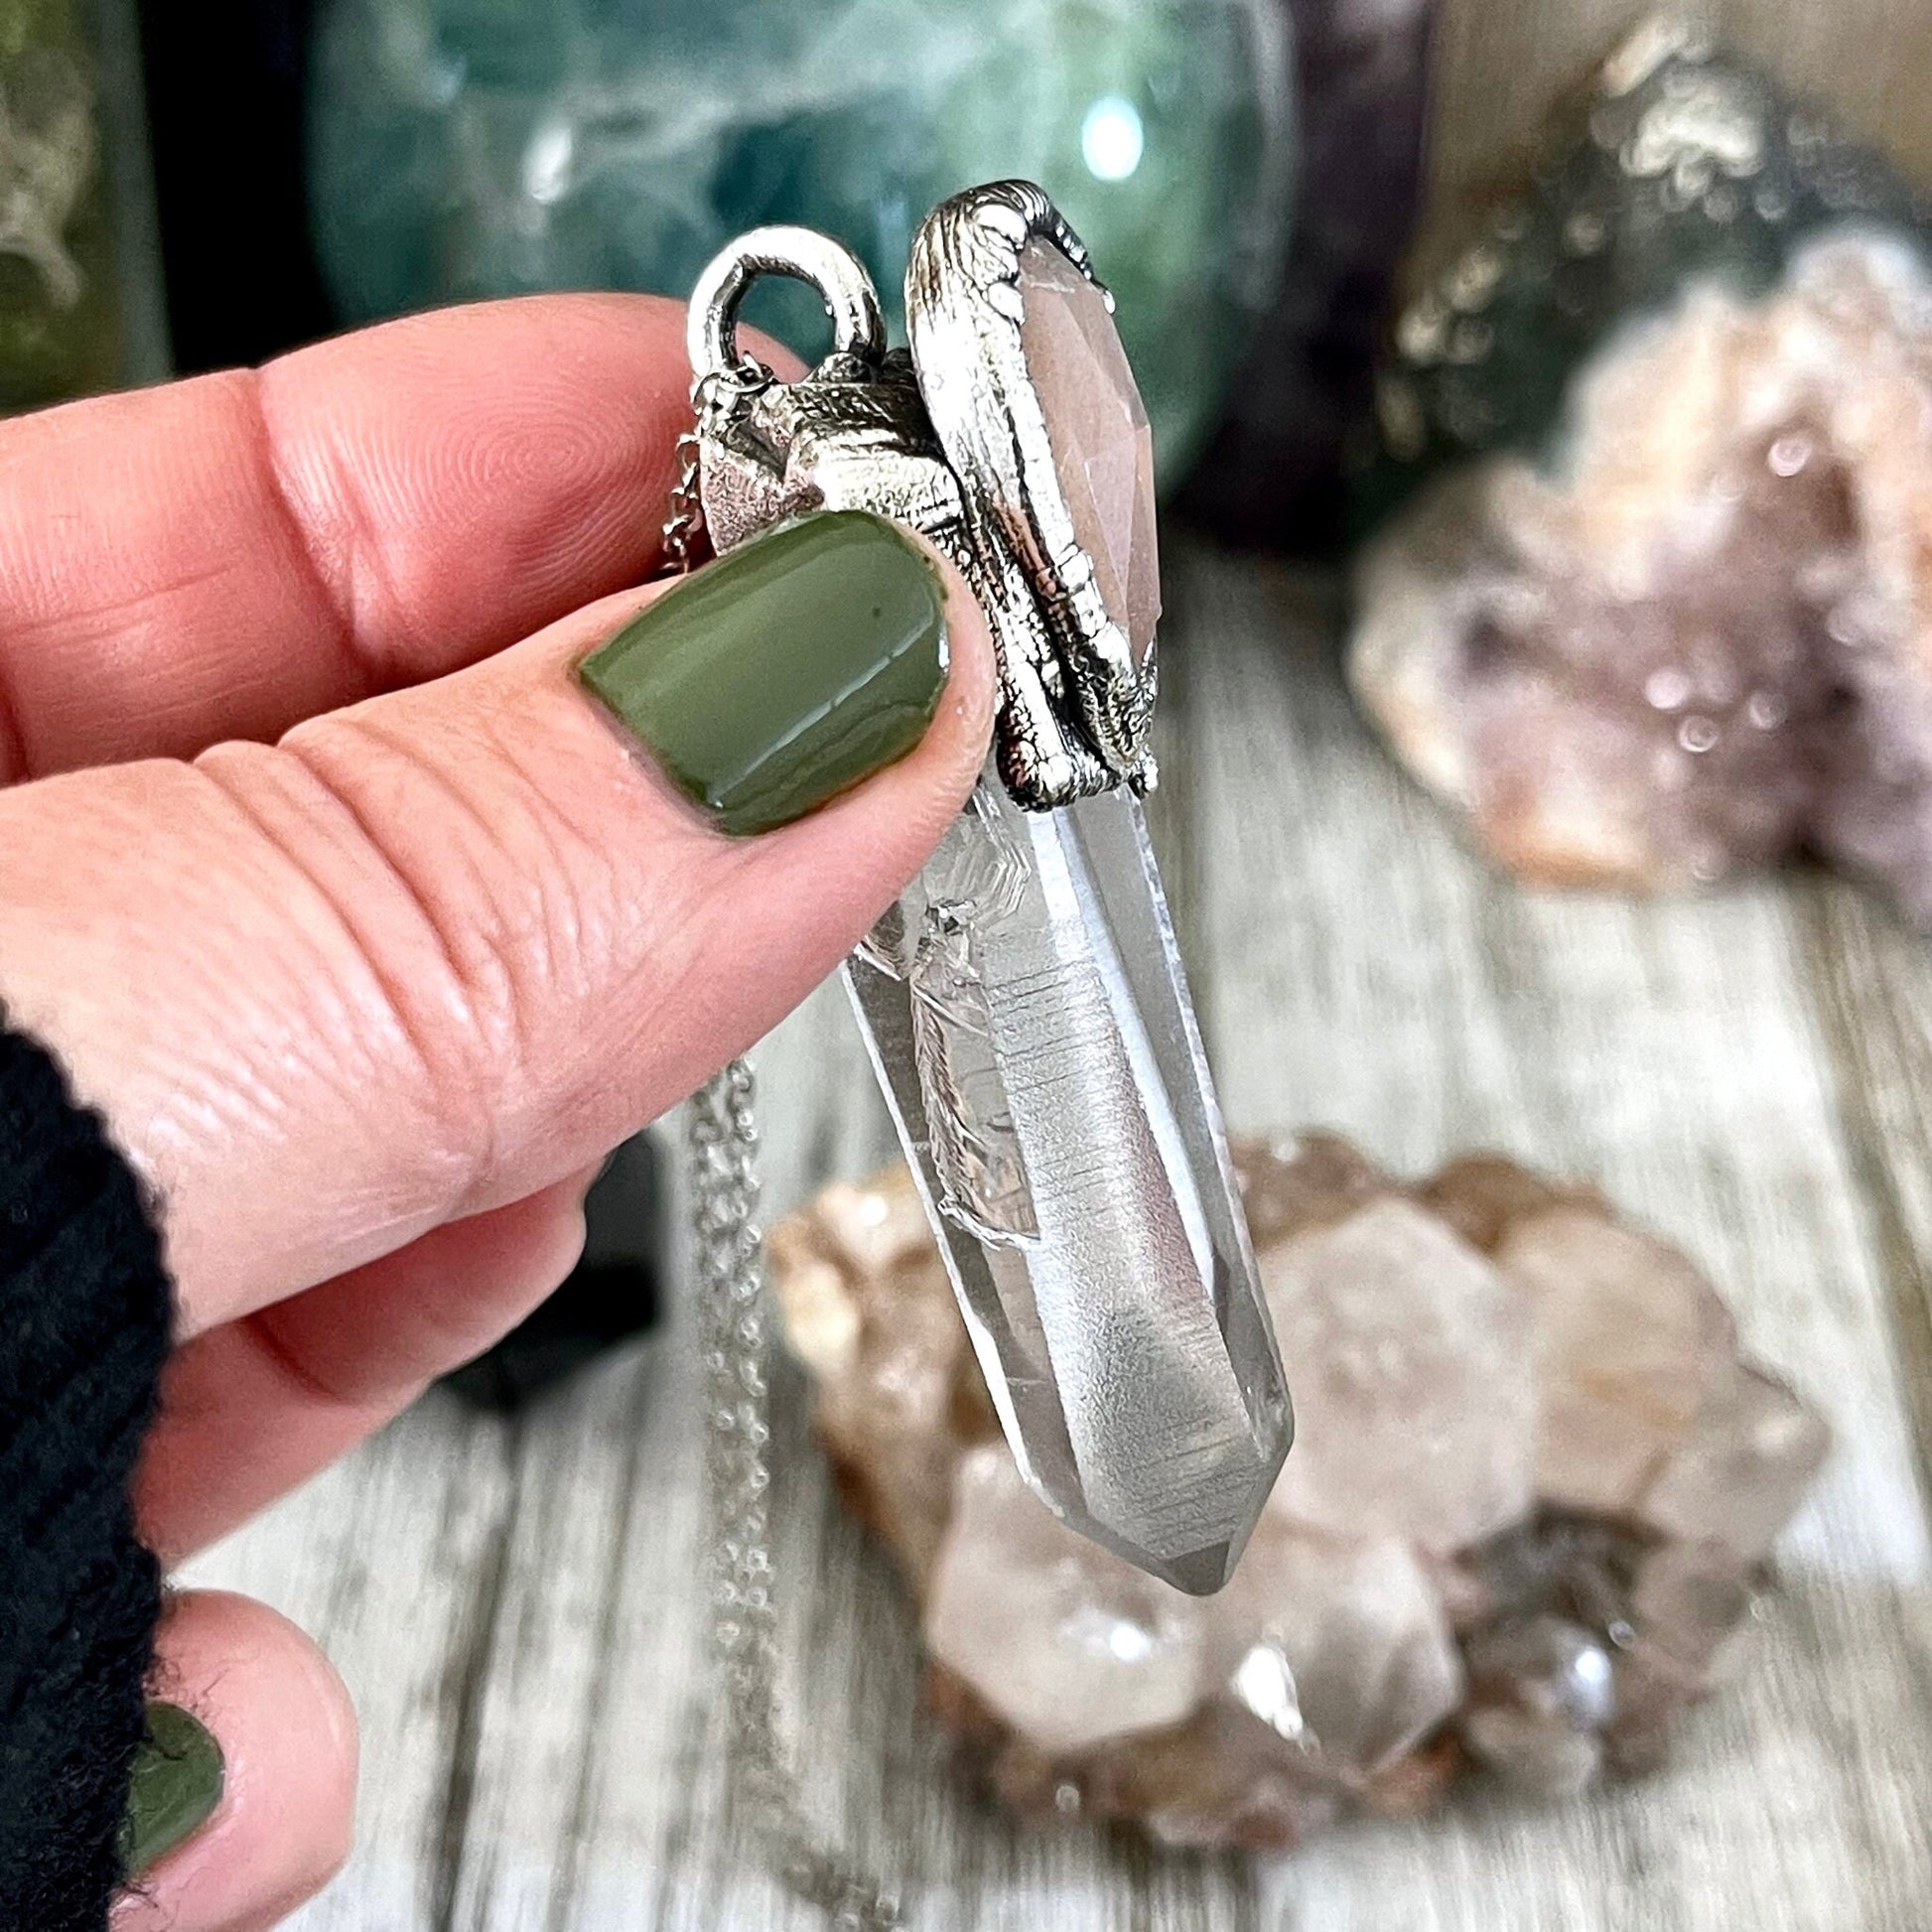 Big Crystal Necklace, Bohemian Jewelry, Clear Quartz Jewelry, Crystal Jewelry, Crystal Necklaces, Etsy ID: 1669651647, FOXLARK- NECKLACES, Jewelry, Large Crystal, Large Raw Crystal, Moonstone pendent, Necklaces, Peach Moonstone, Raw crystal jewelry, raw c